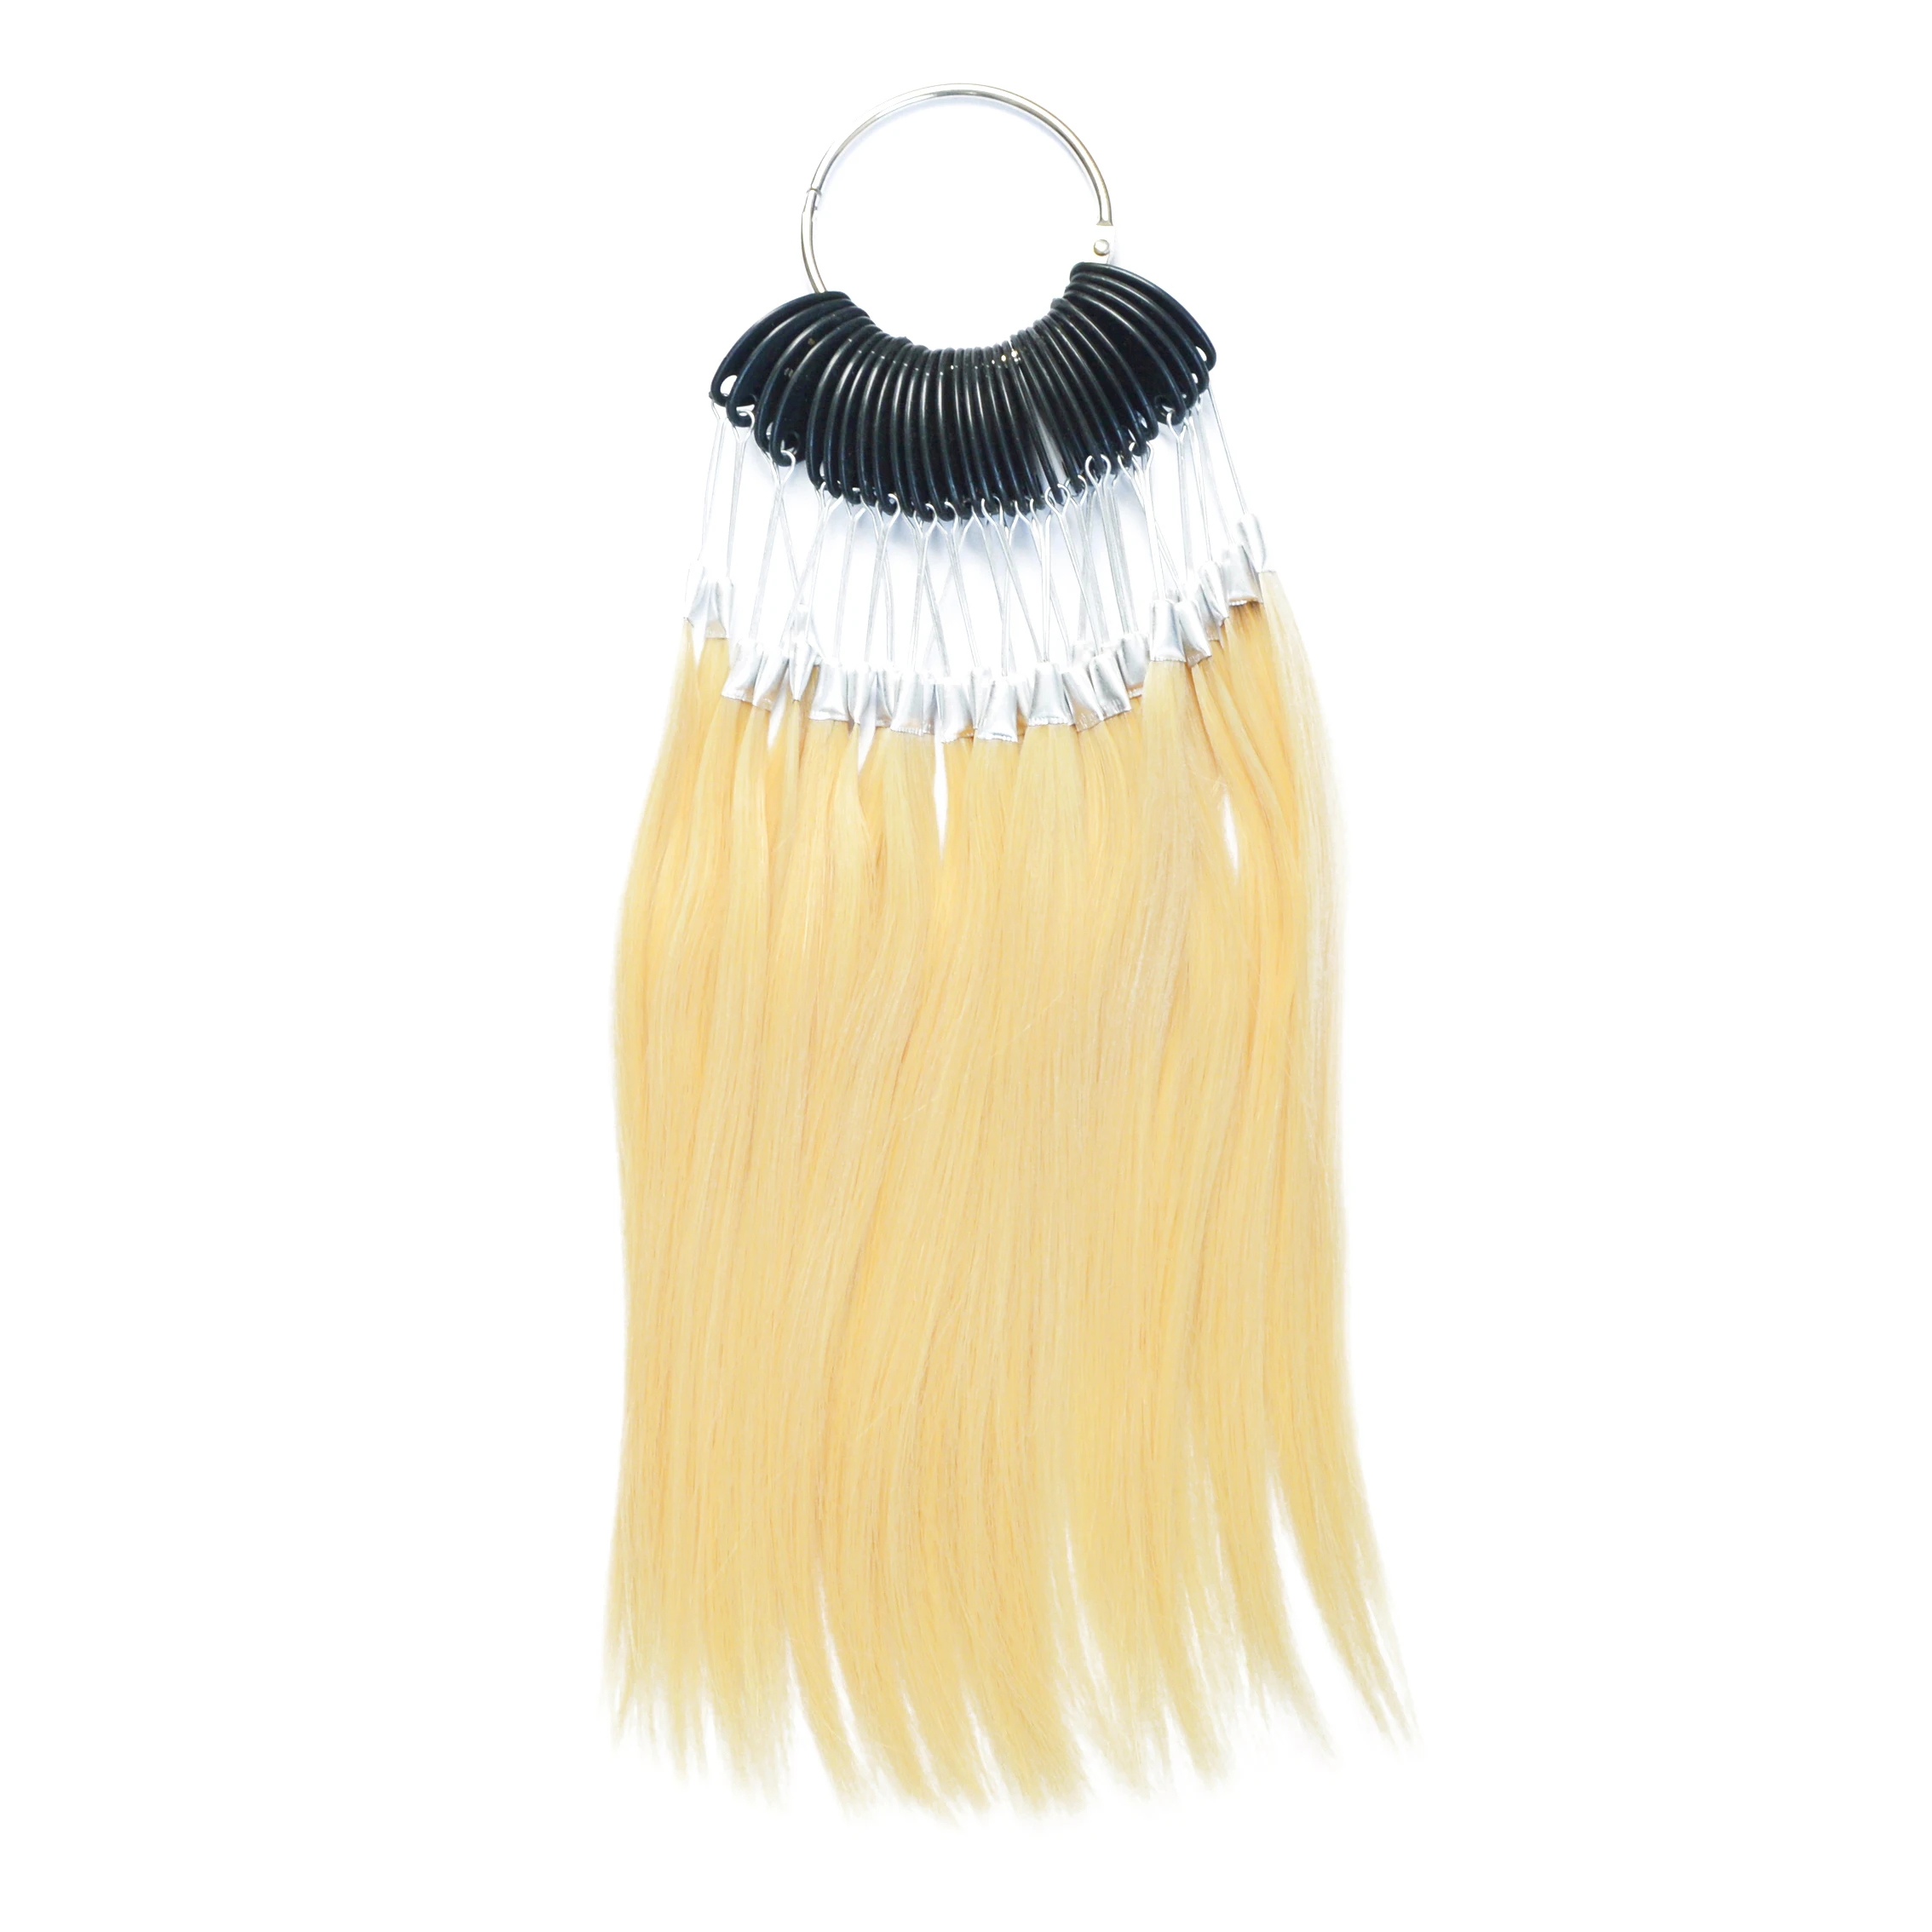 Ring  For Human Hair Extensions And Salon Hair Dyeing Sample, Can Be Dye Any Color